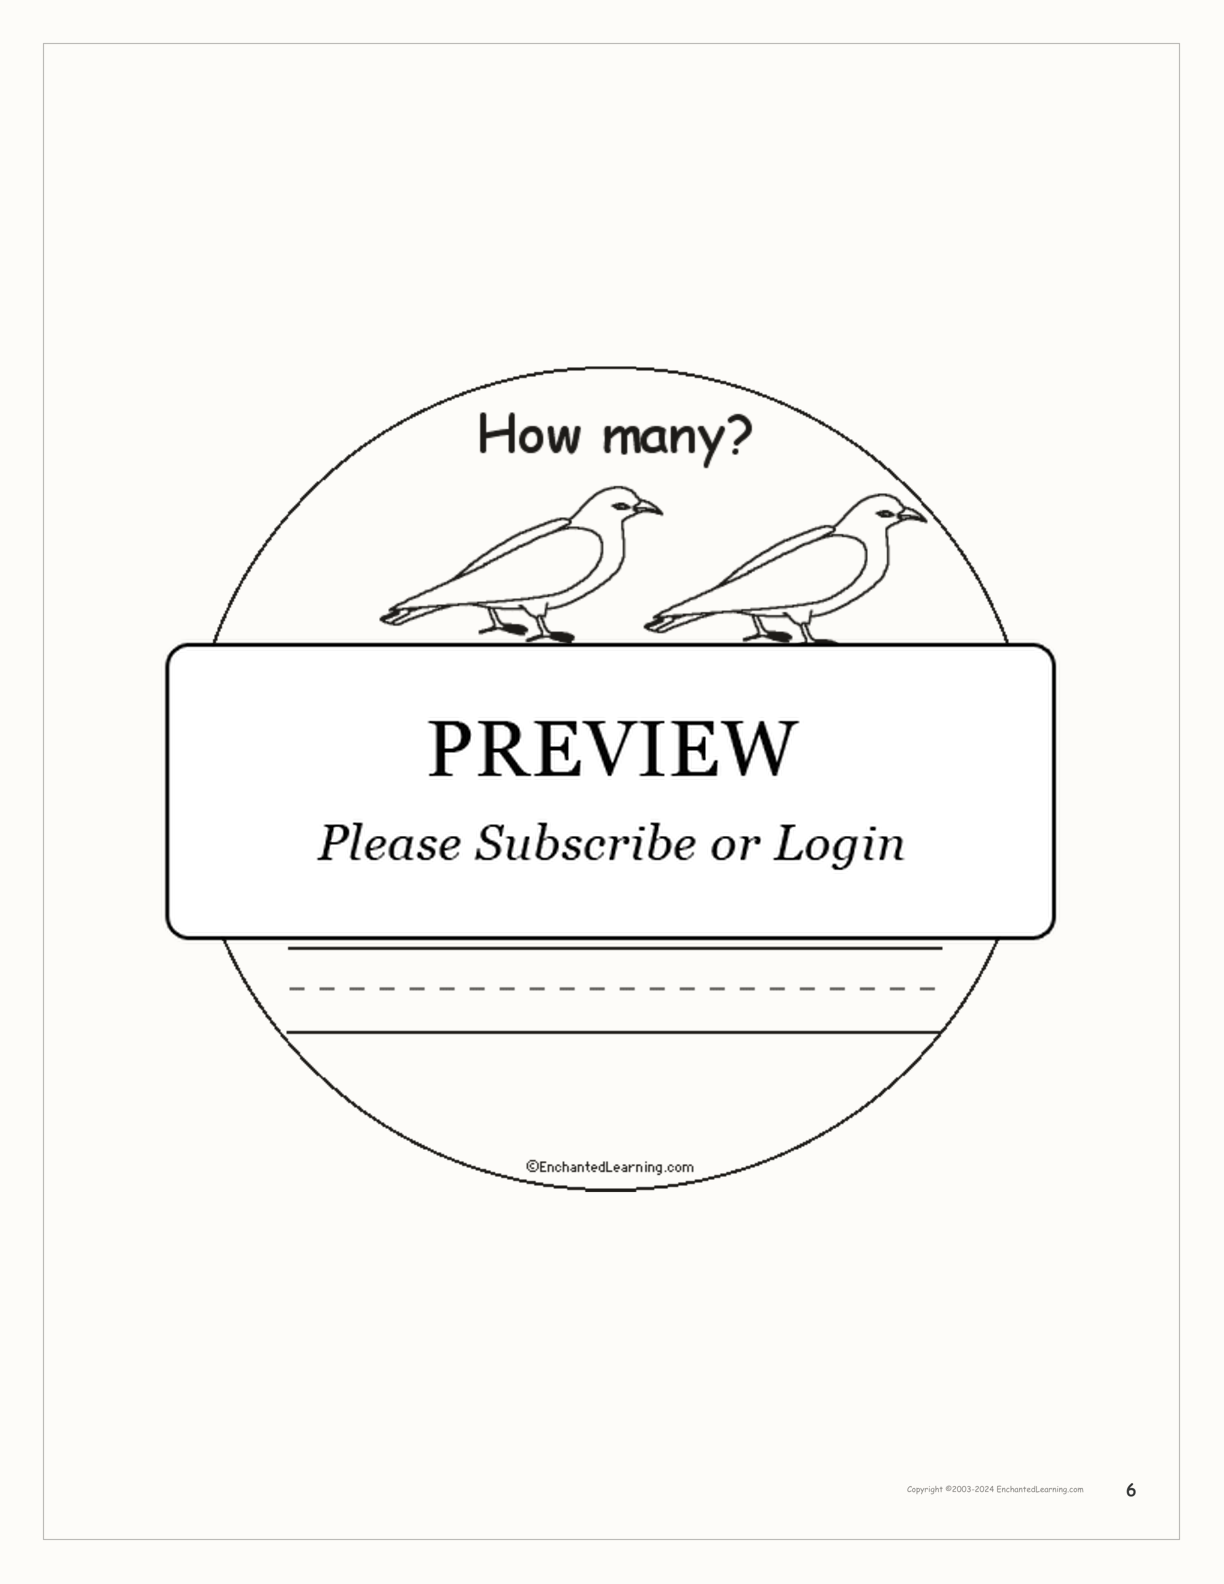 How Many Colorful Birds? Book for Early Readers interactive printout page 6